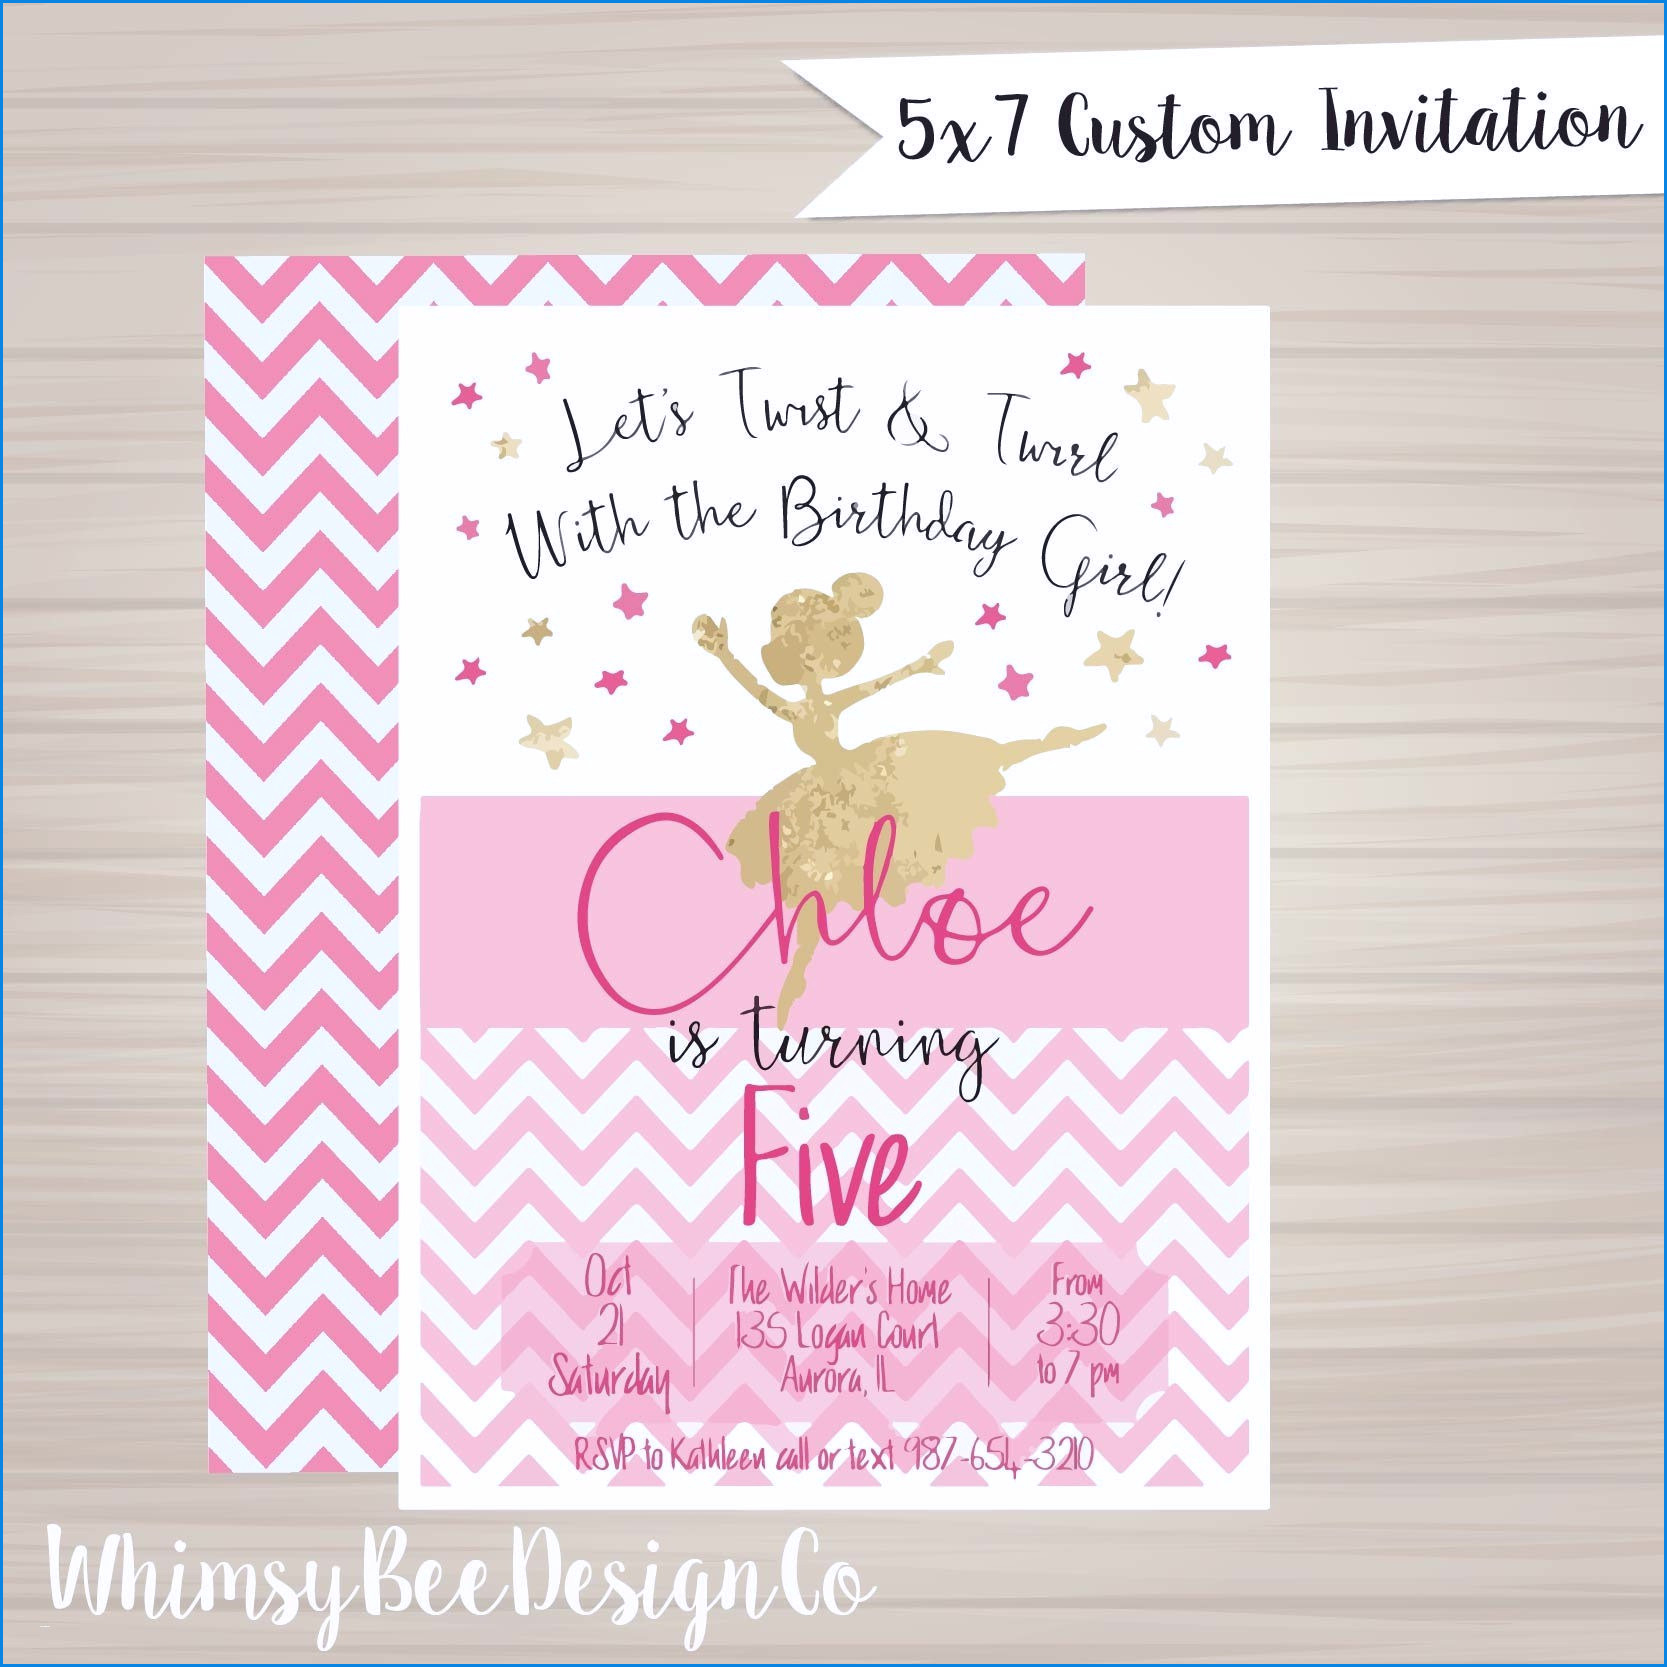 Candyland Invitations Lovely Free Printable Cow Birthday Invitations - Free Printable Cow Birthday Invitations